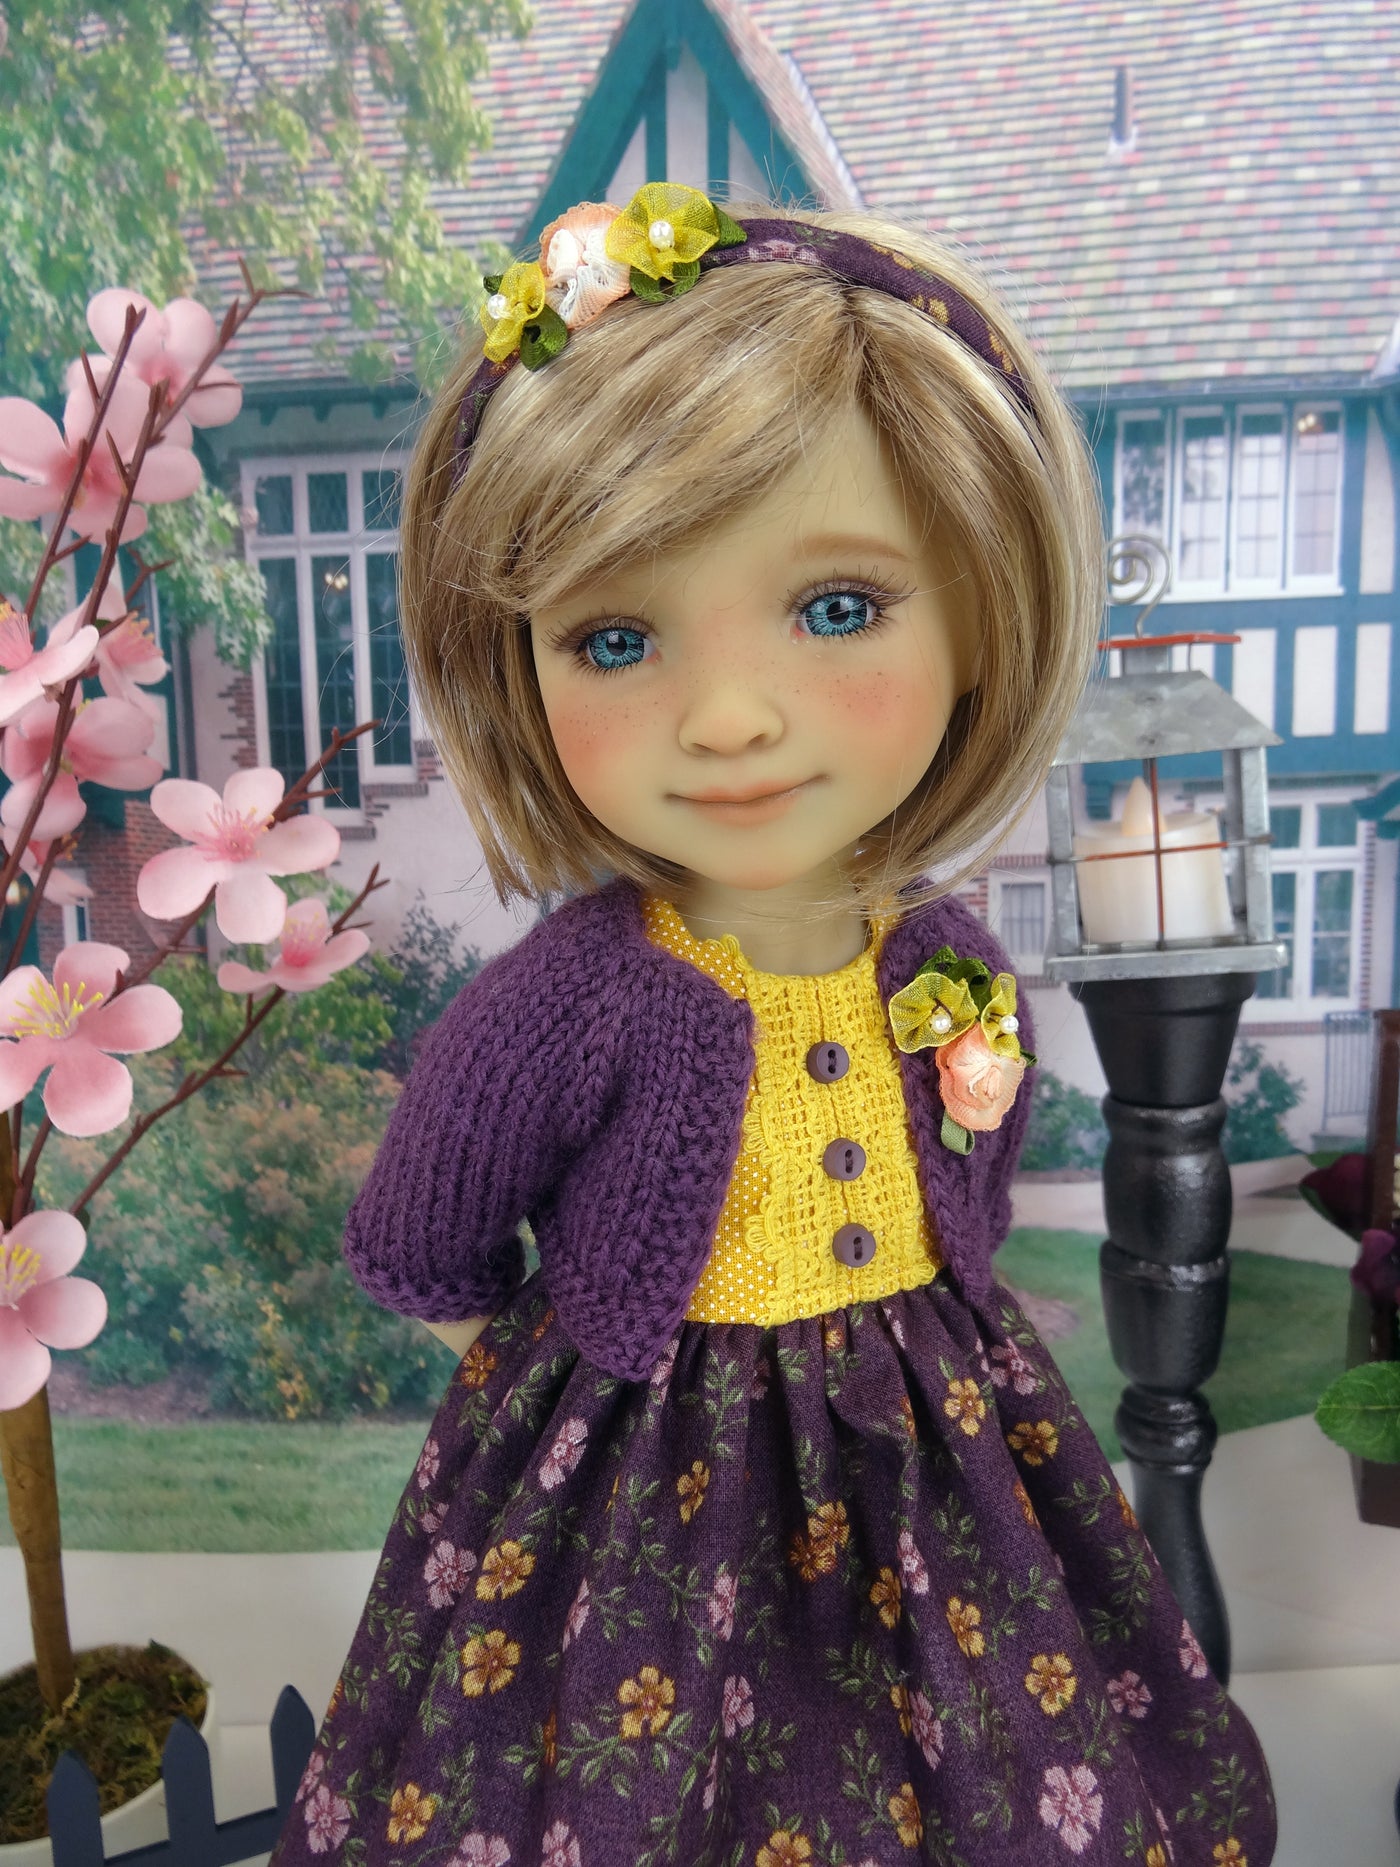 Wildflowers at Dusk - dress and sweater with shoes for Ruby Red Fashion Friends doll